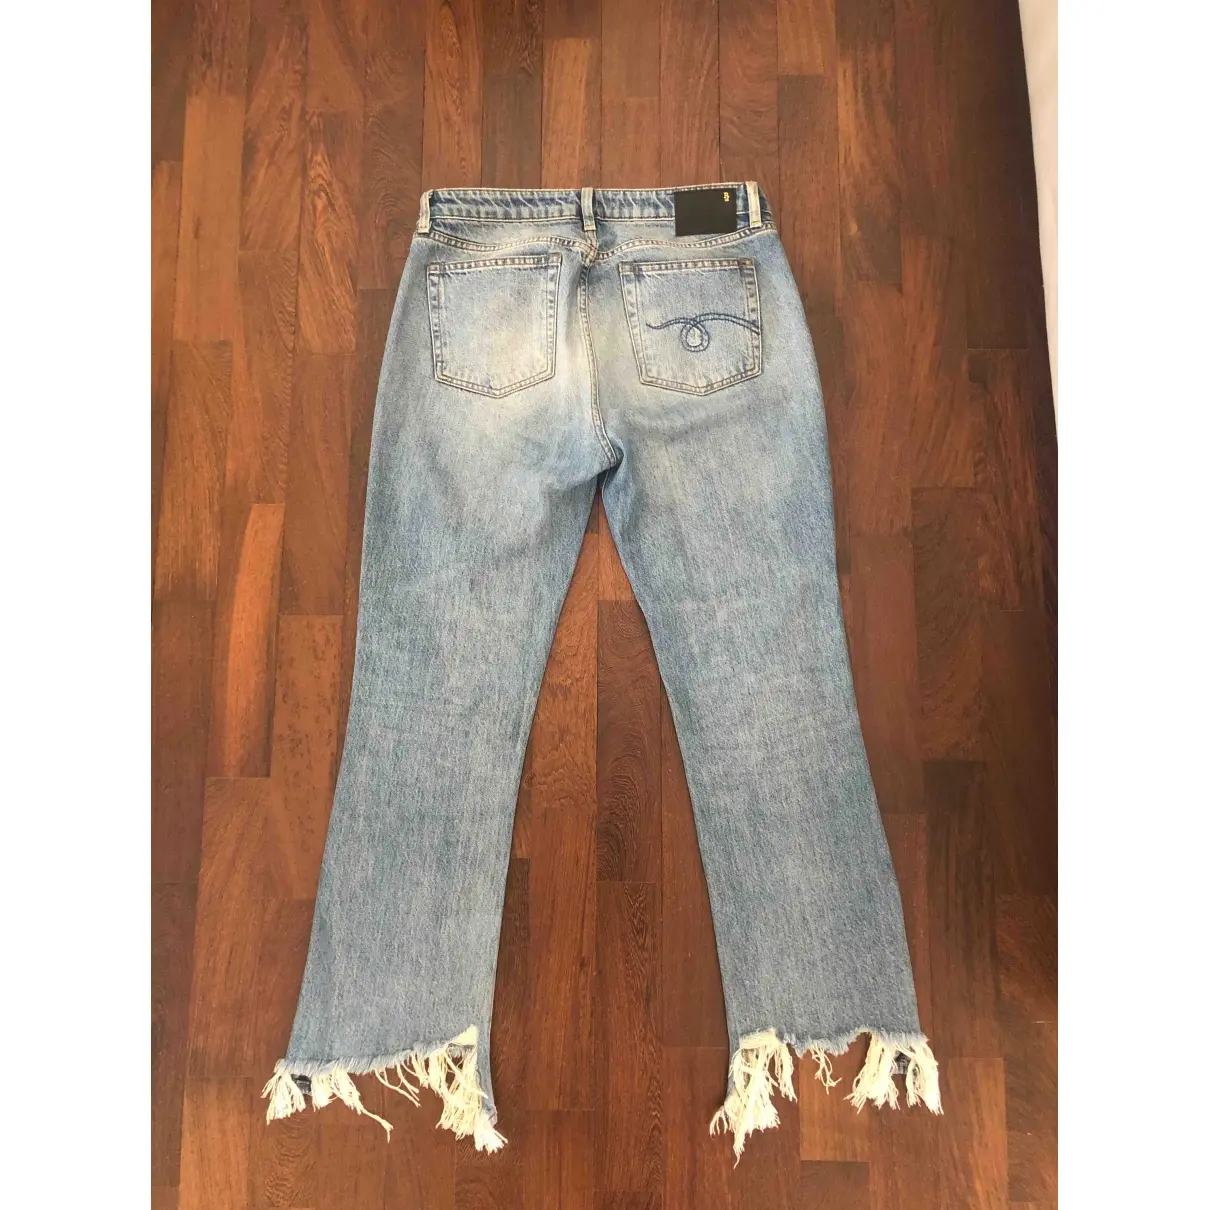 R13 Straight jeans for sale